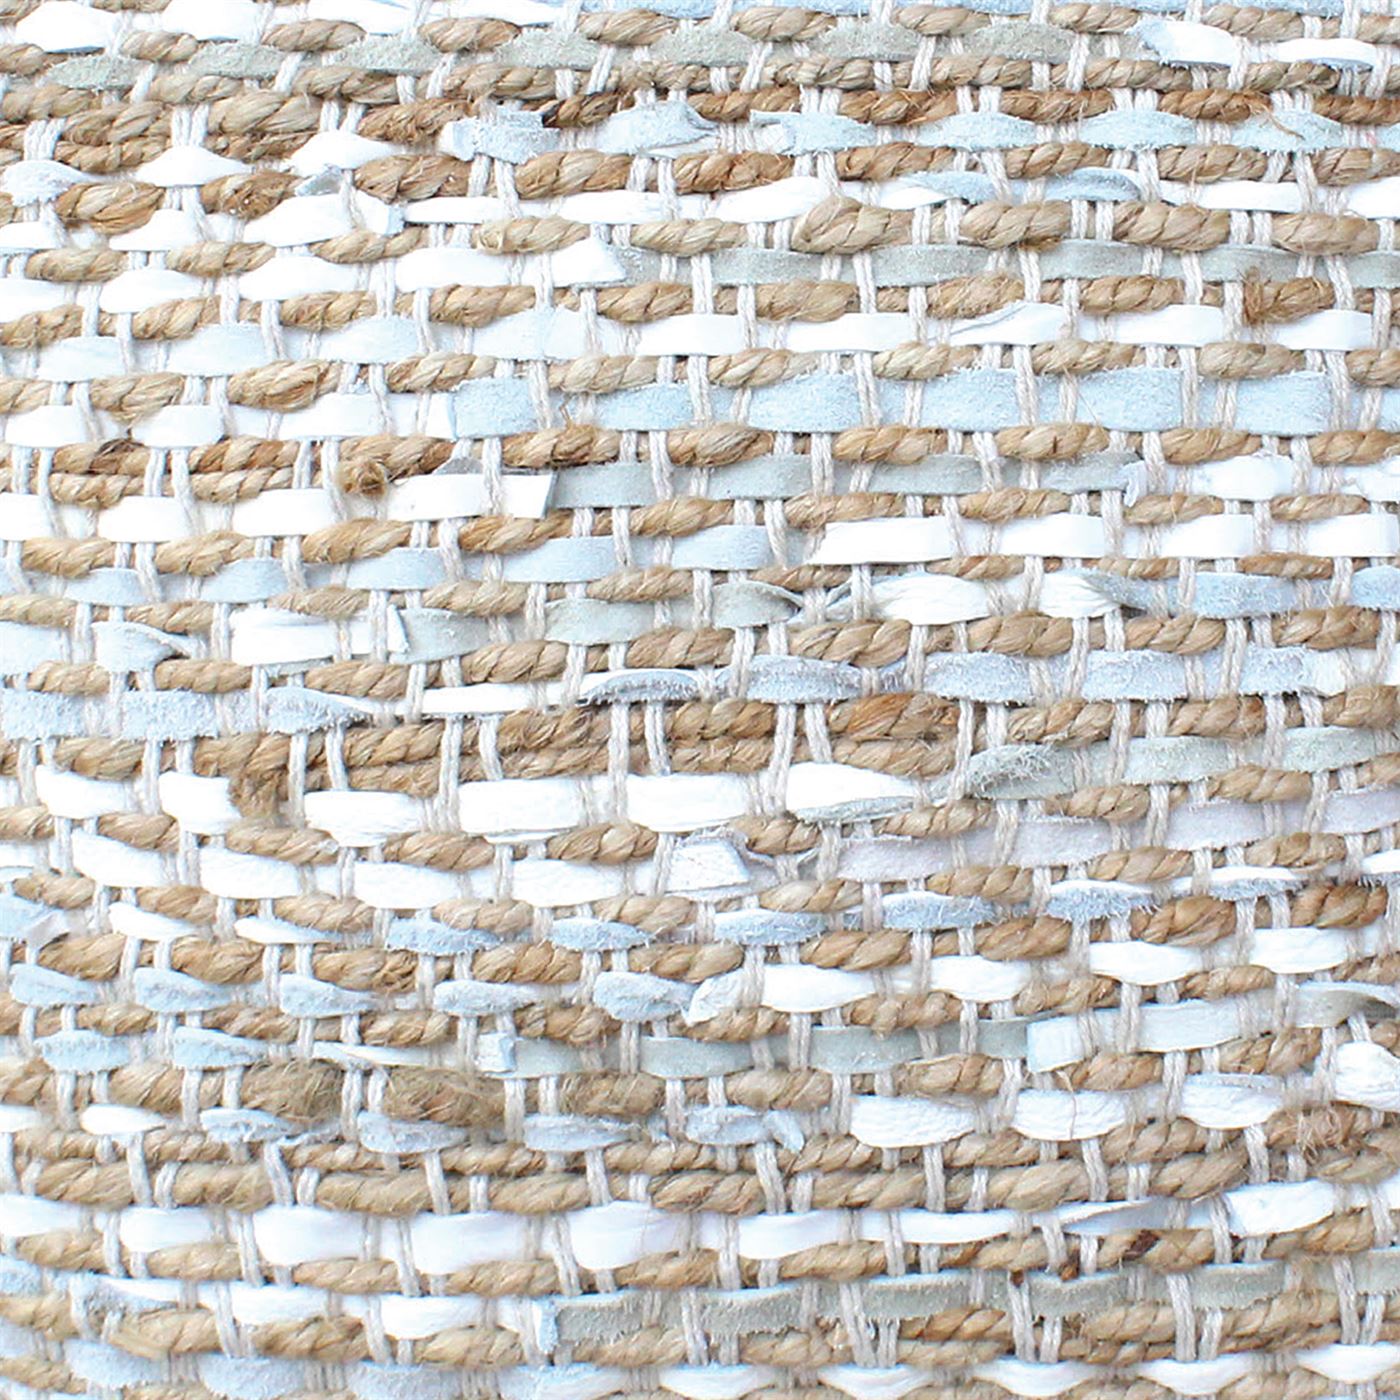 Stables Pillow, Hemp, Leather, Natural, Natural White, Pitloom, Flat Weave 